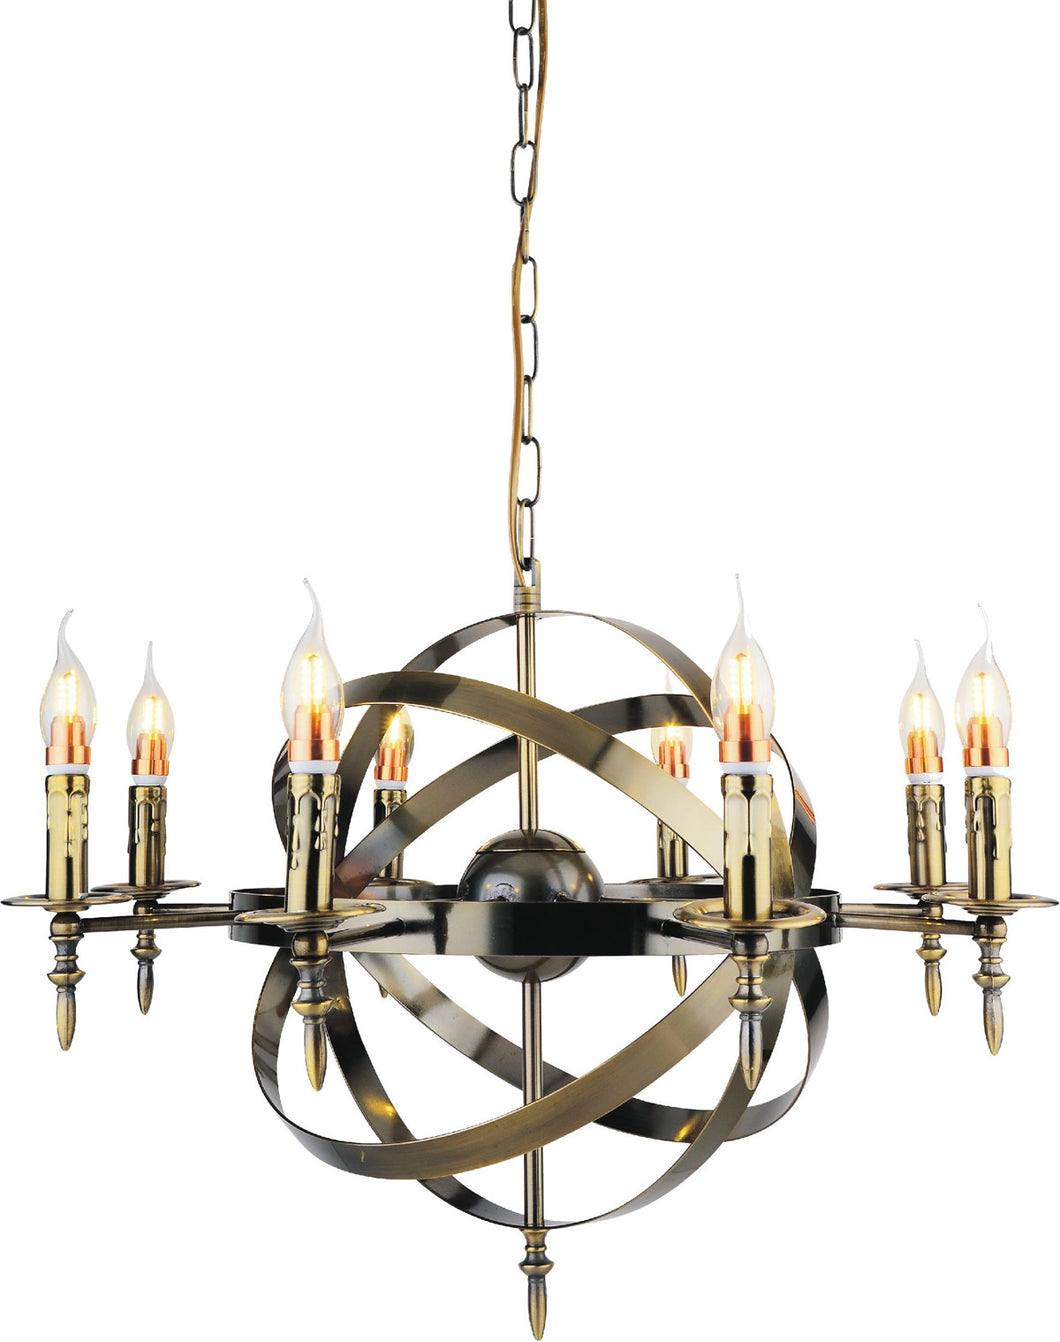 8 Light Up Chandelier with Antique Bronze finish